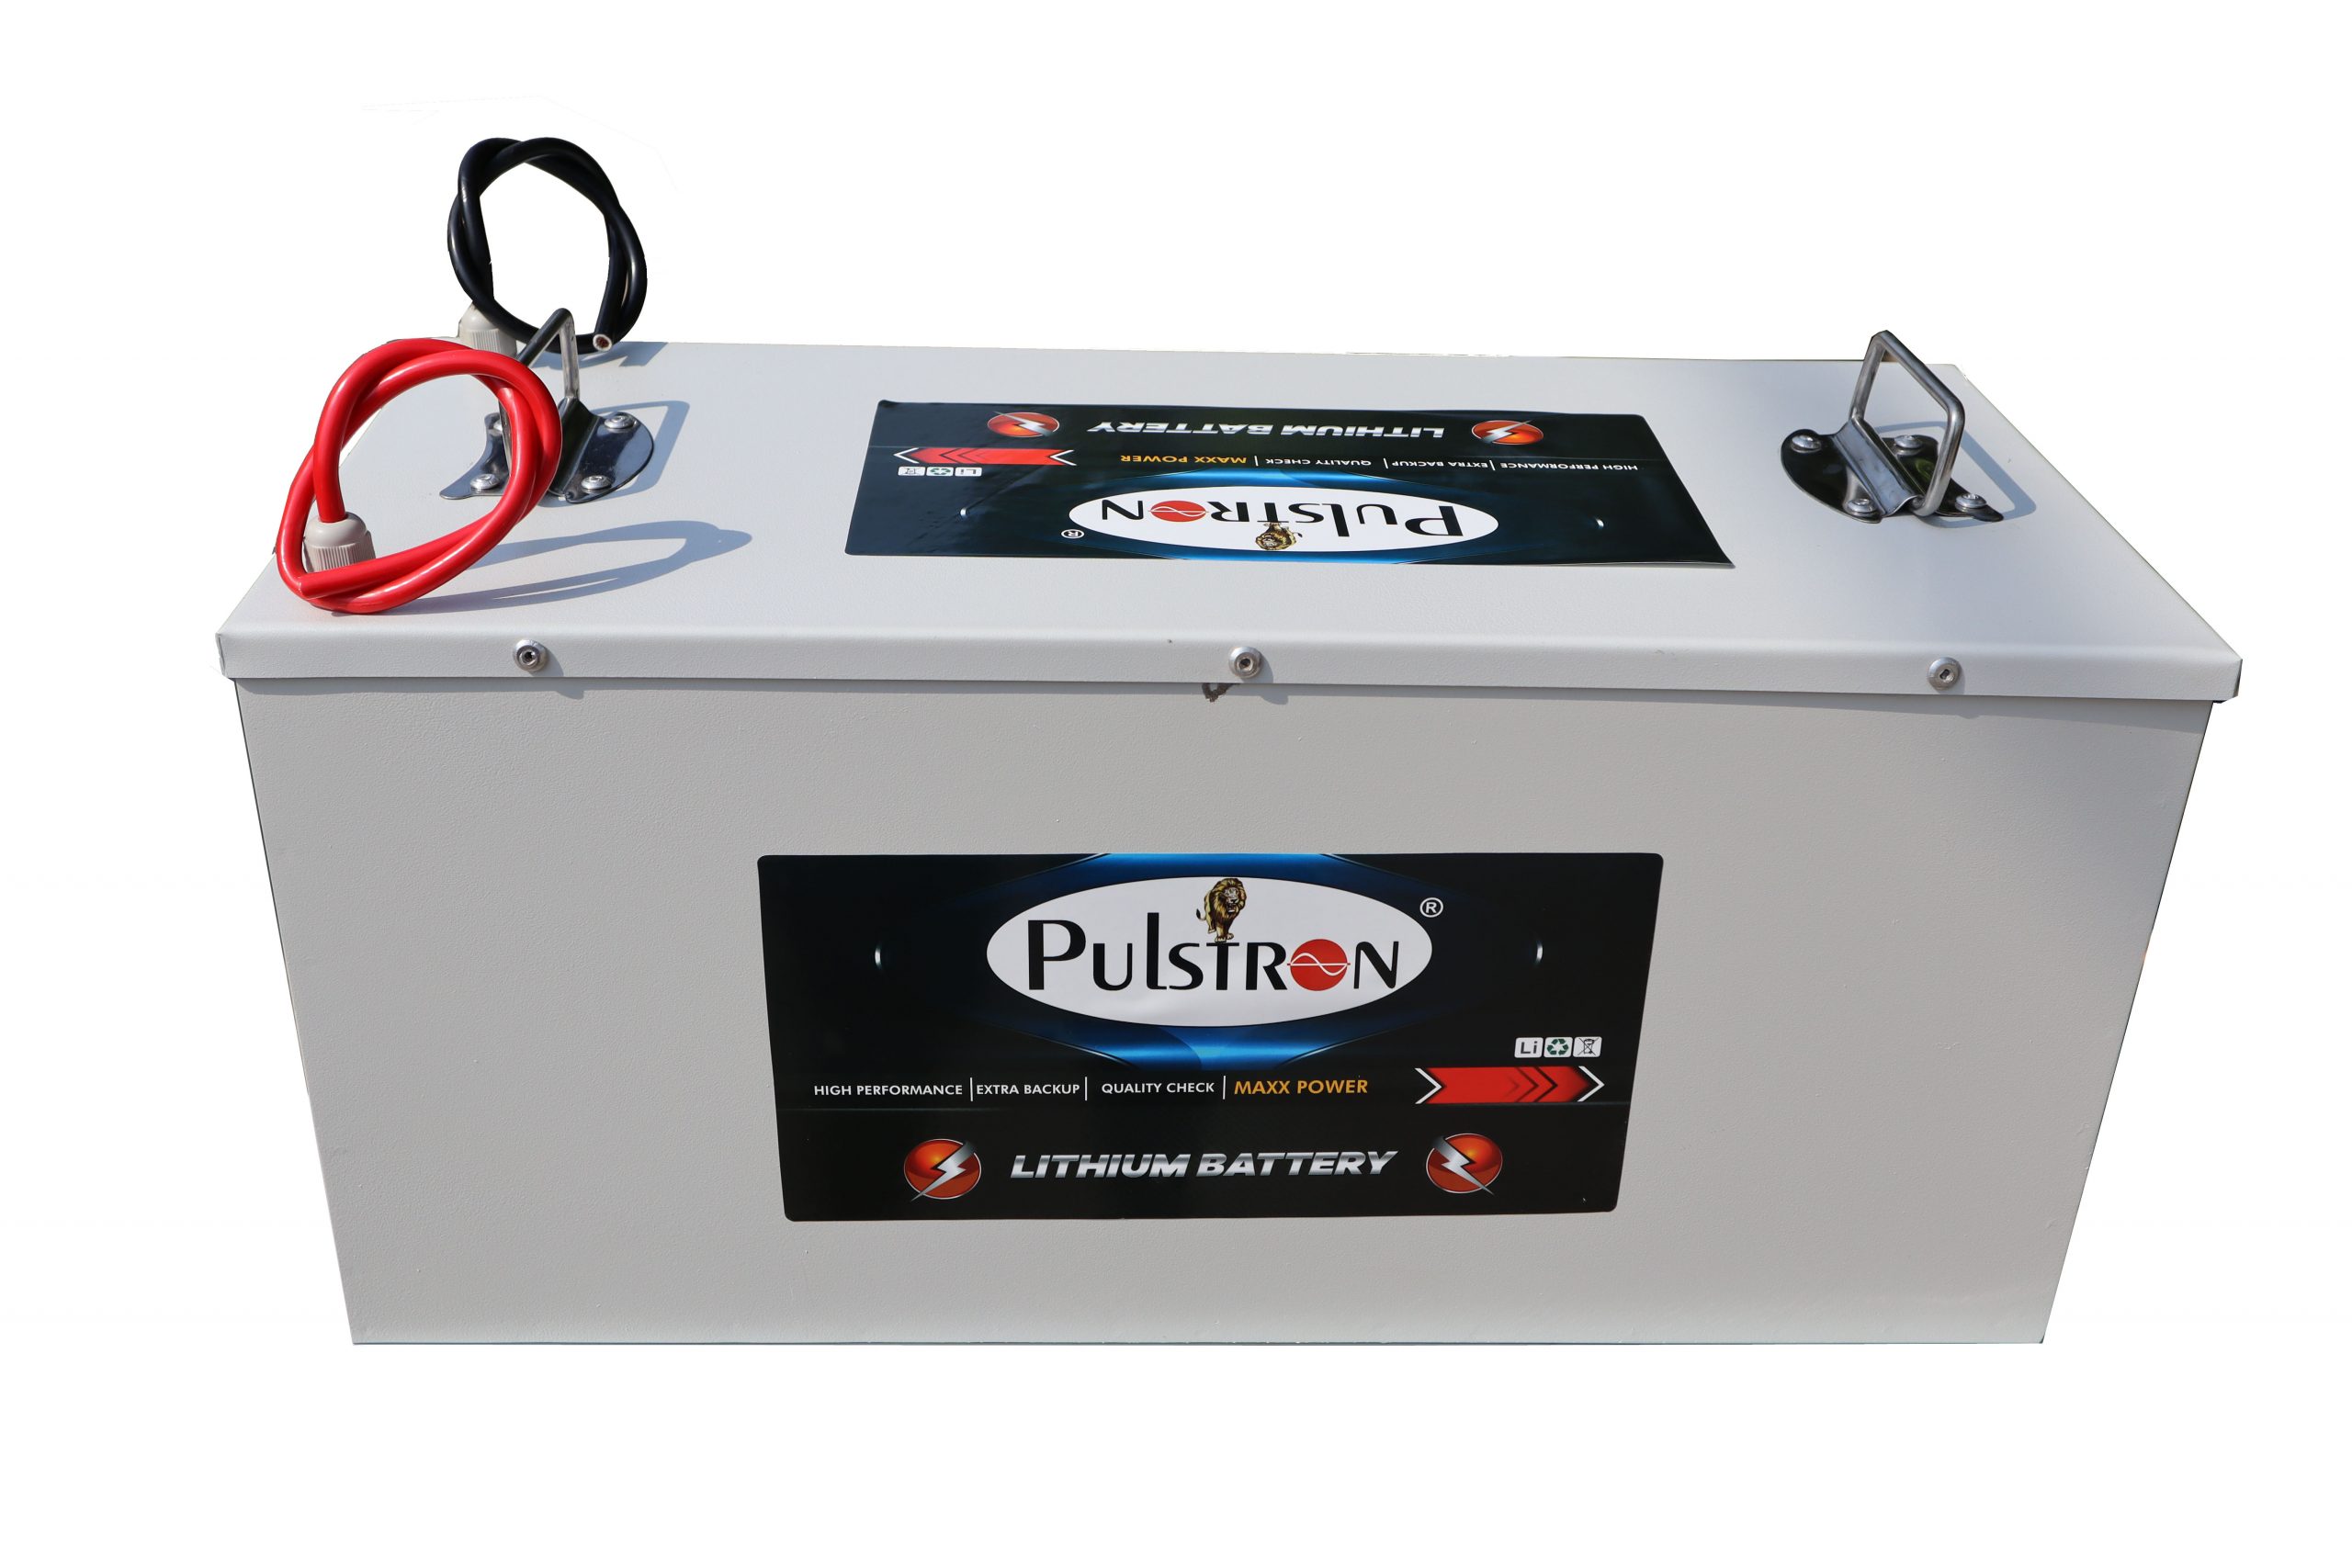 Pulstron 12V 100Ah Metal Lithium Iron Phosphate Solar Inverter Battery Pack  with BMS Protection